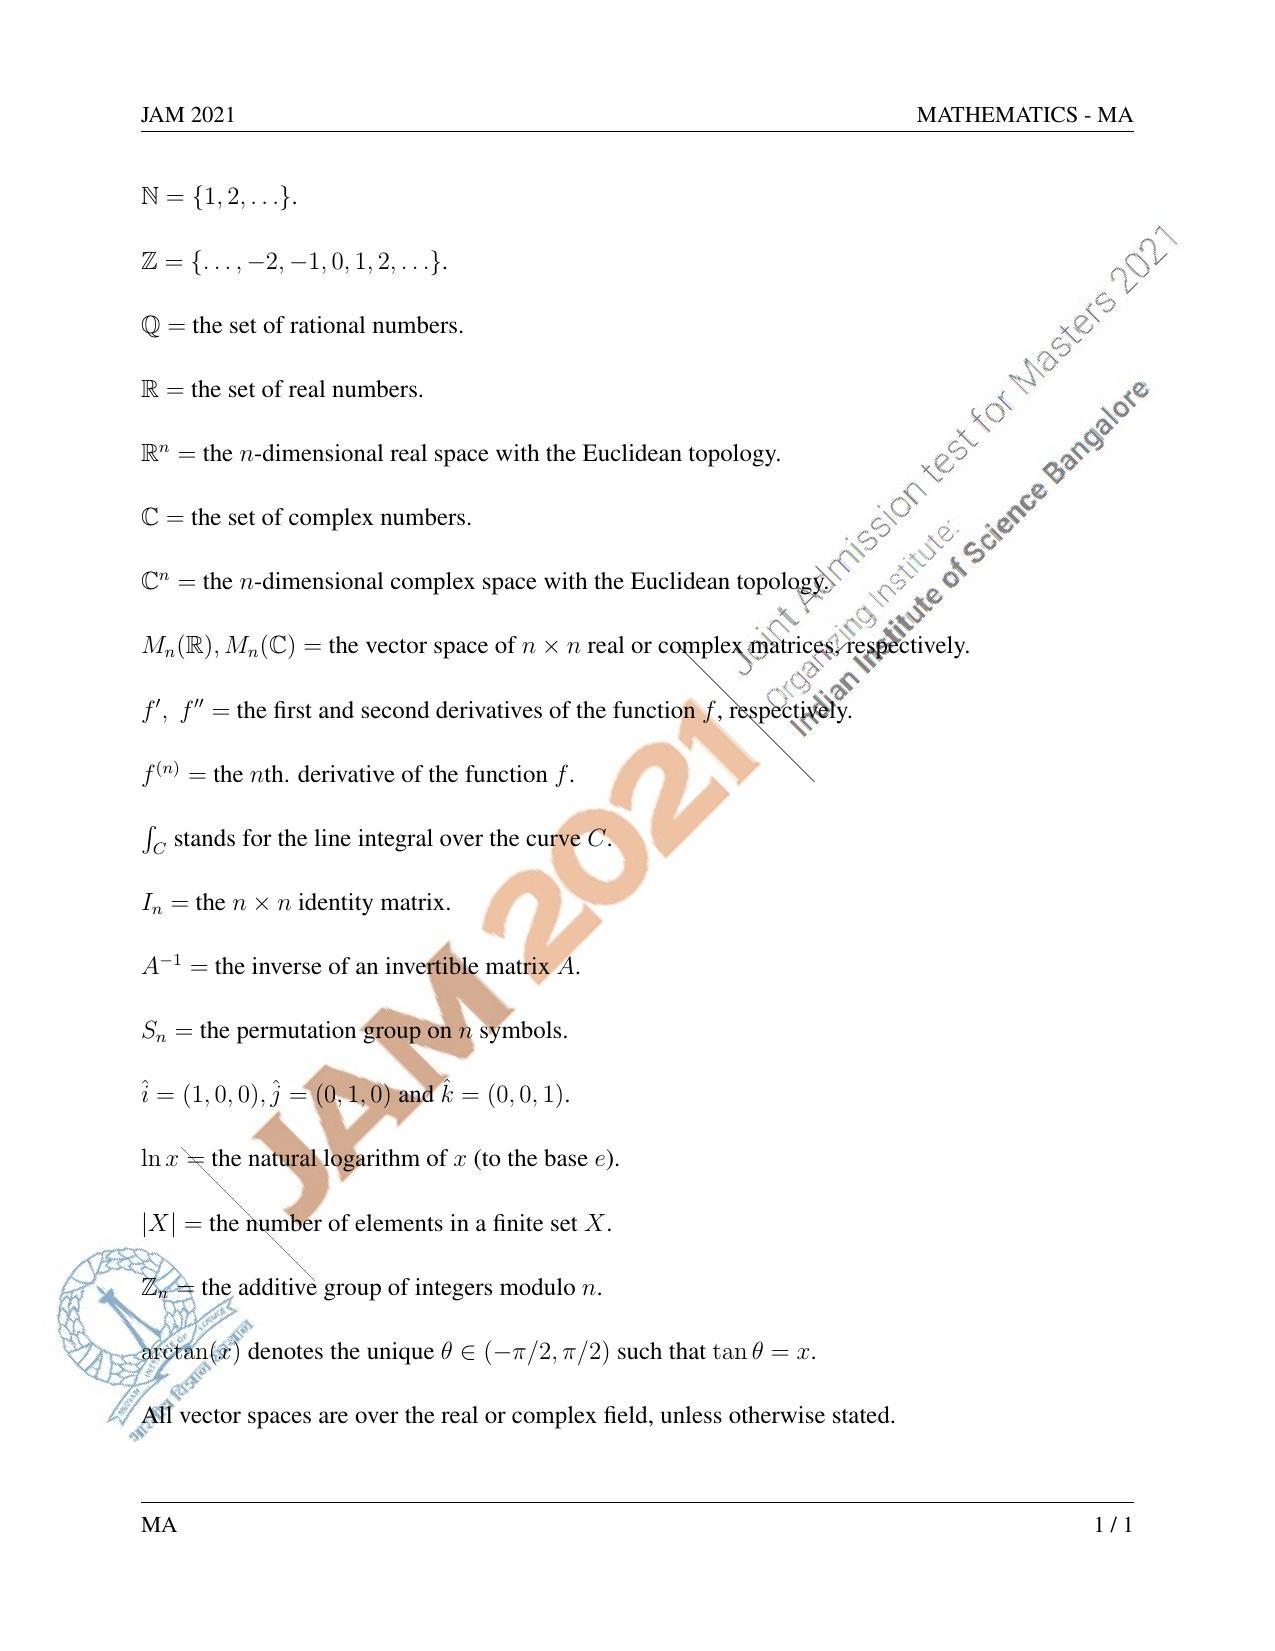 JAM 2021: MA Question Paper - Page 1